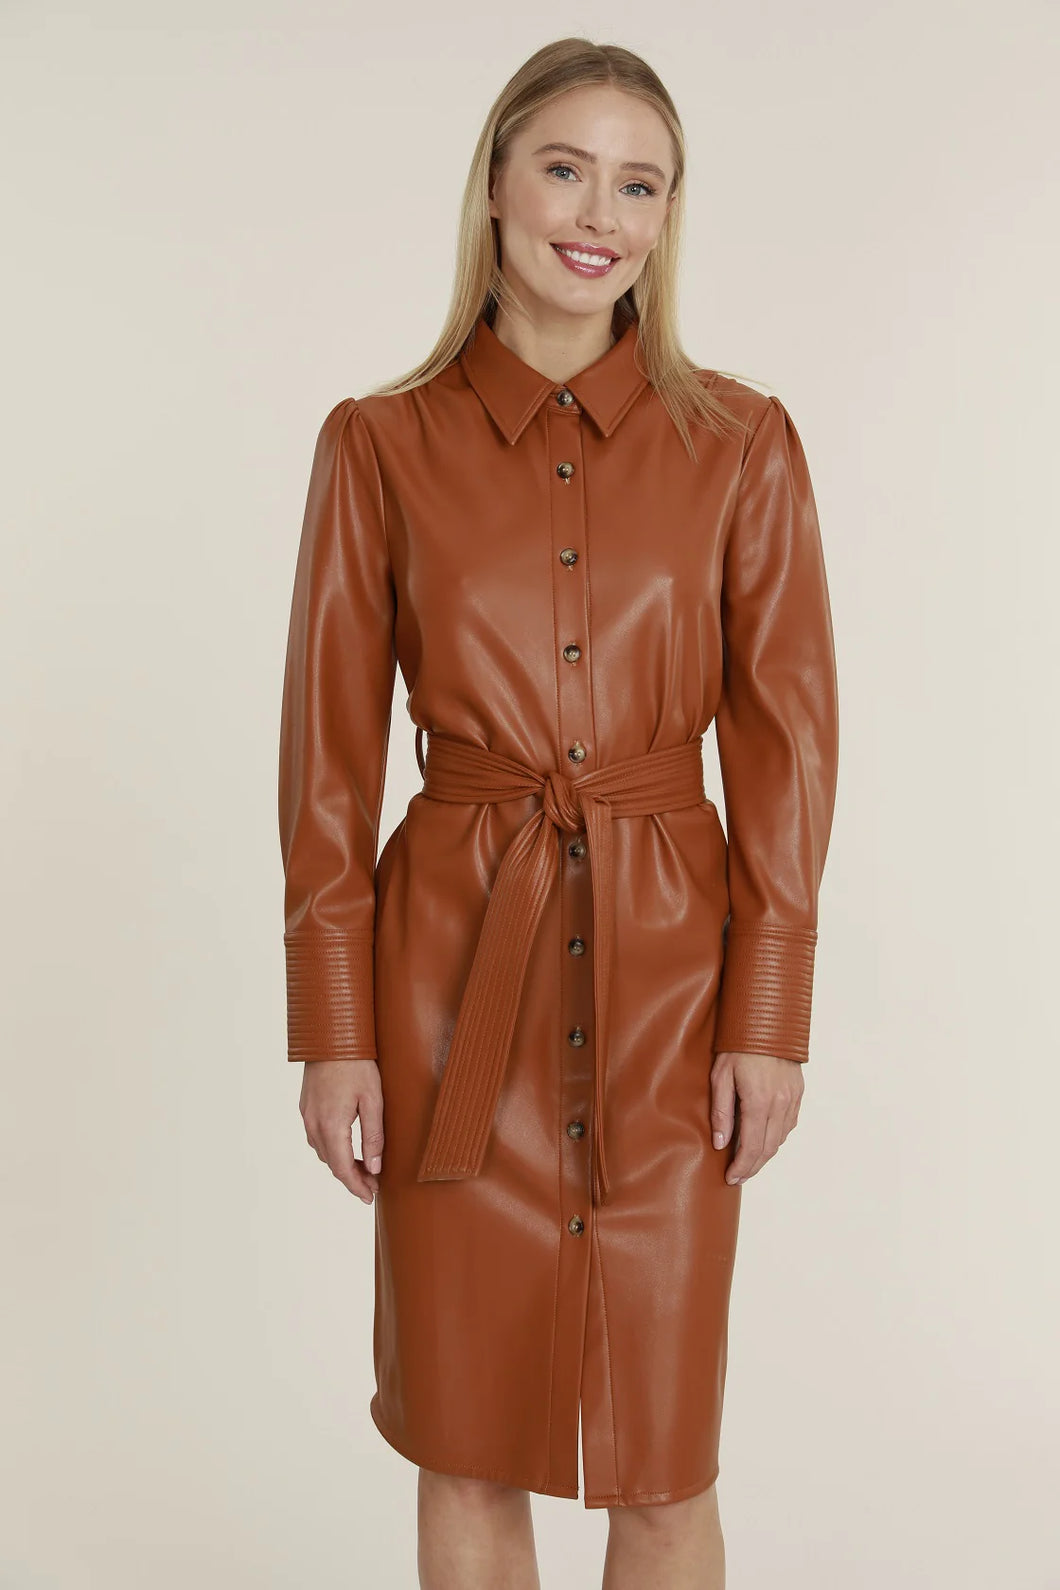 Vegan Leather Mid Length Dress - Available in Sienna & Black